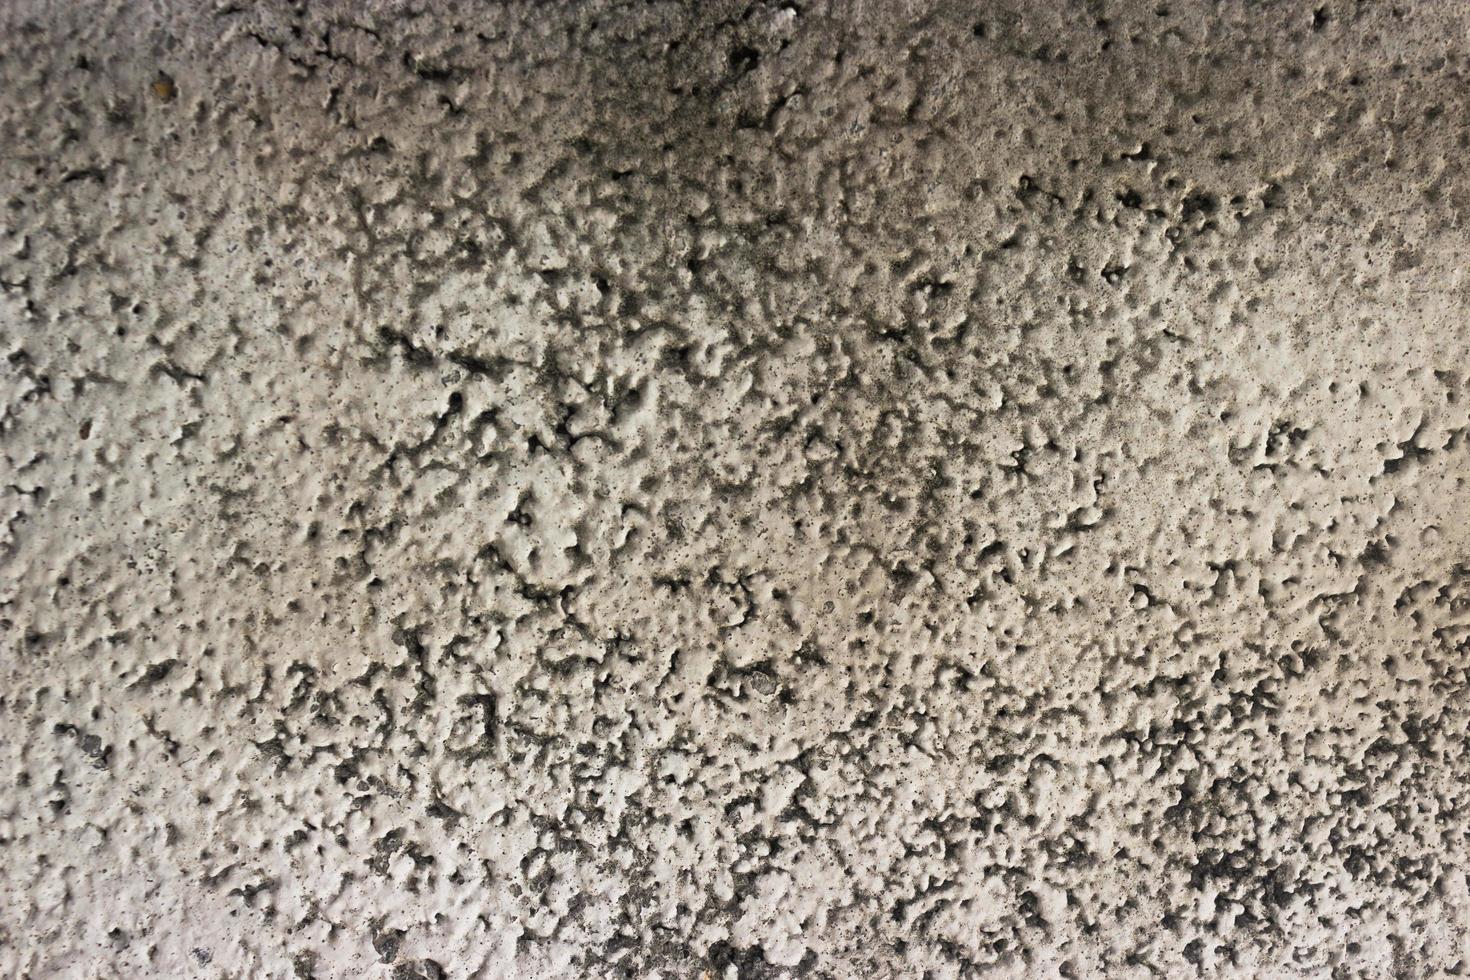 Cement wall for texture or background photo